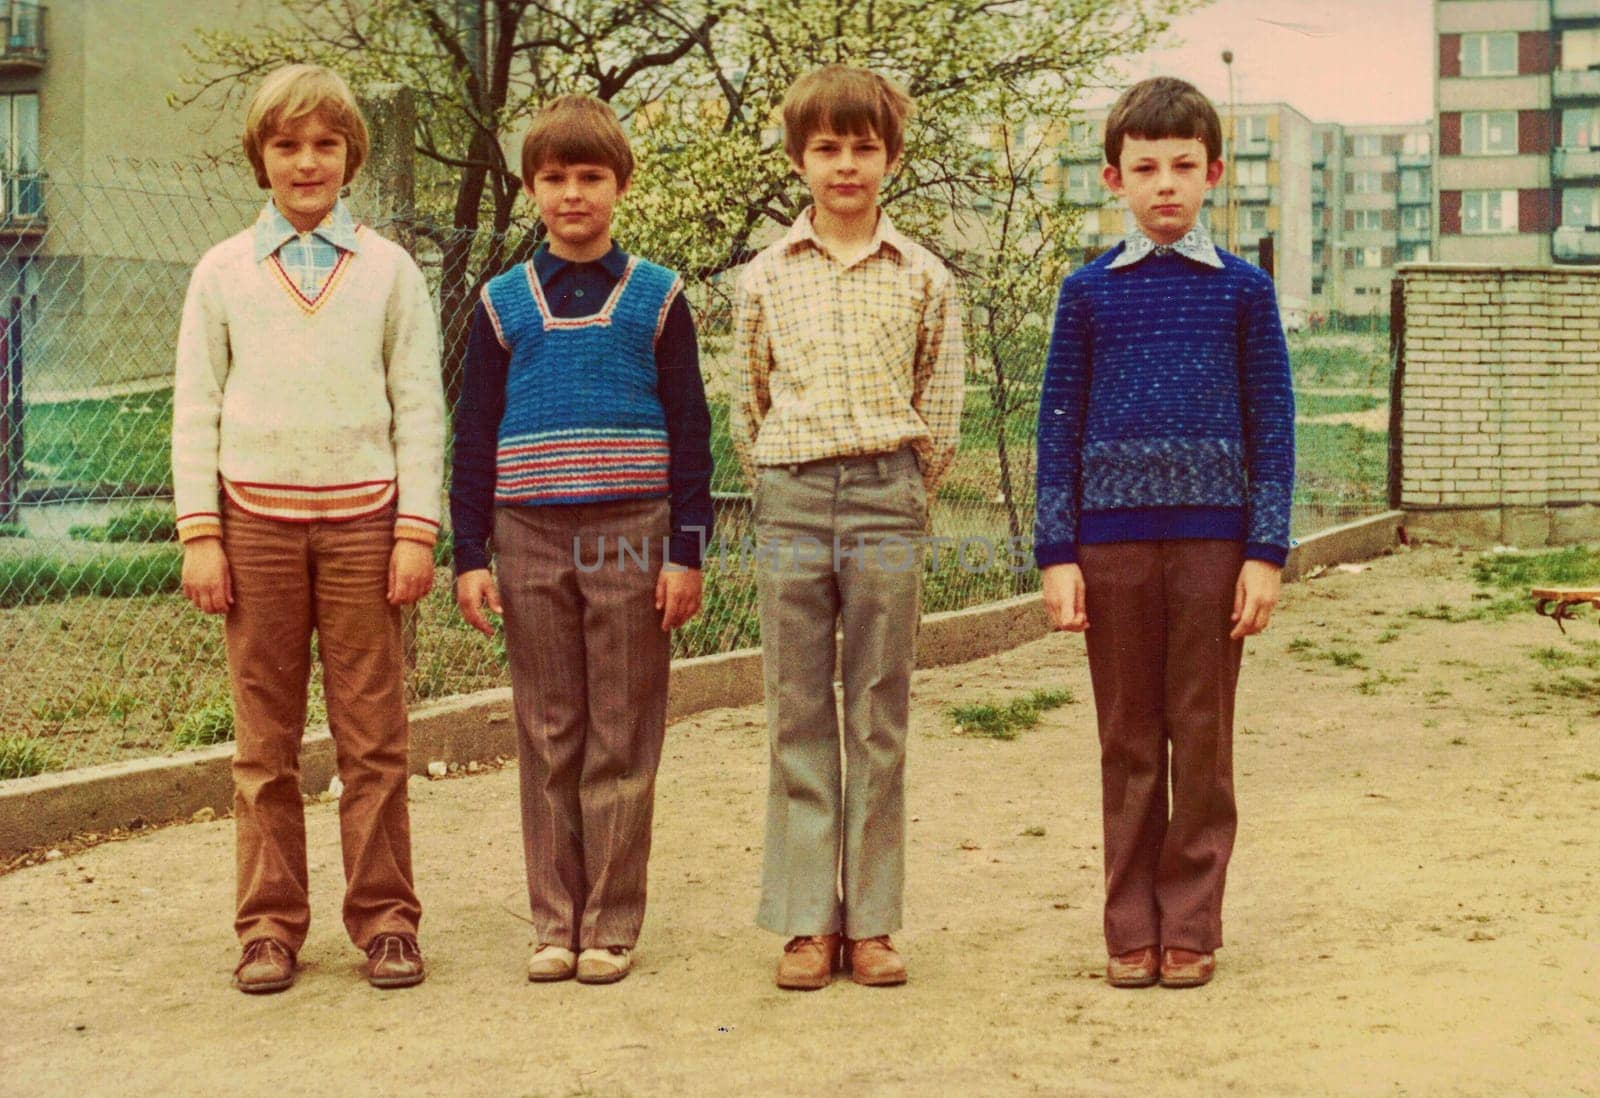 THE CZECHOSLOVAK SOCIALIST REPUBLIC - CIRCA 1980s: Retro photo shows pupils (boys) outdoors. They pose for a group photography. Color photo.